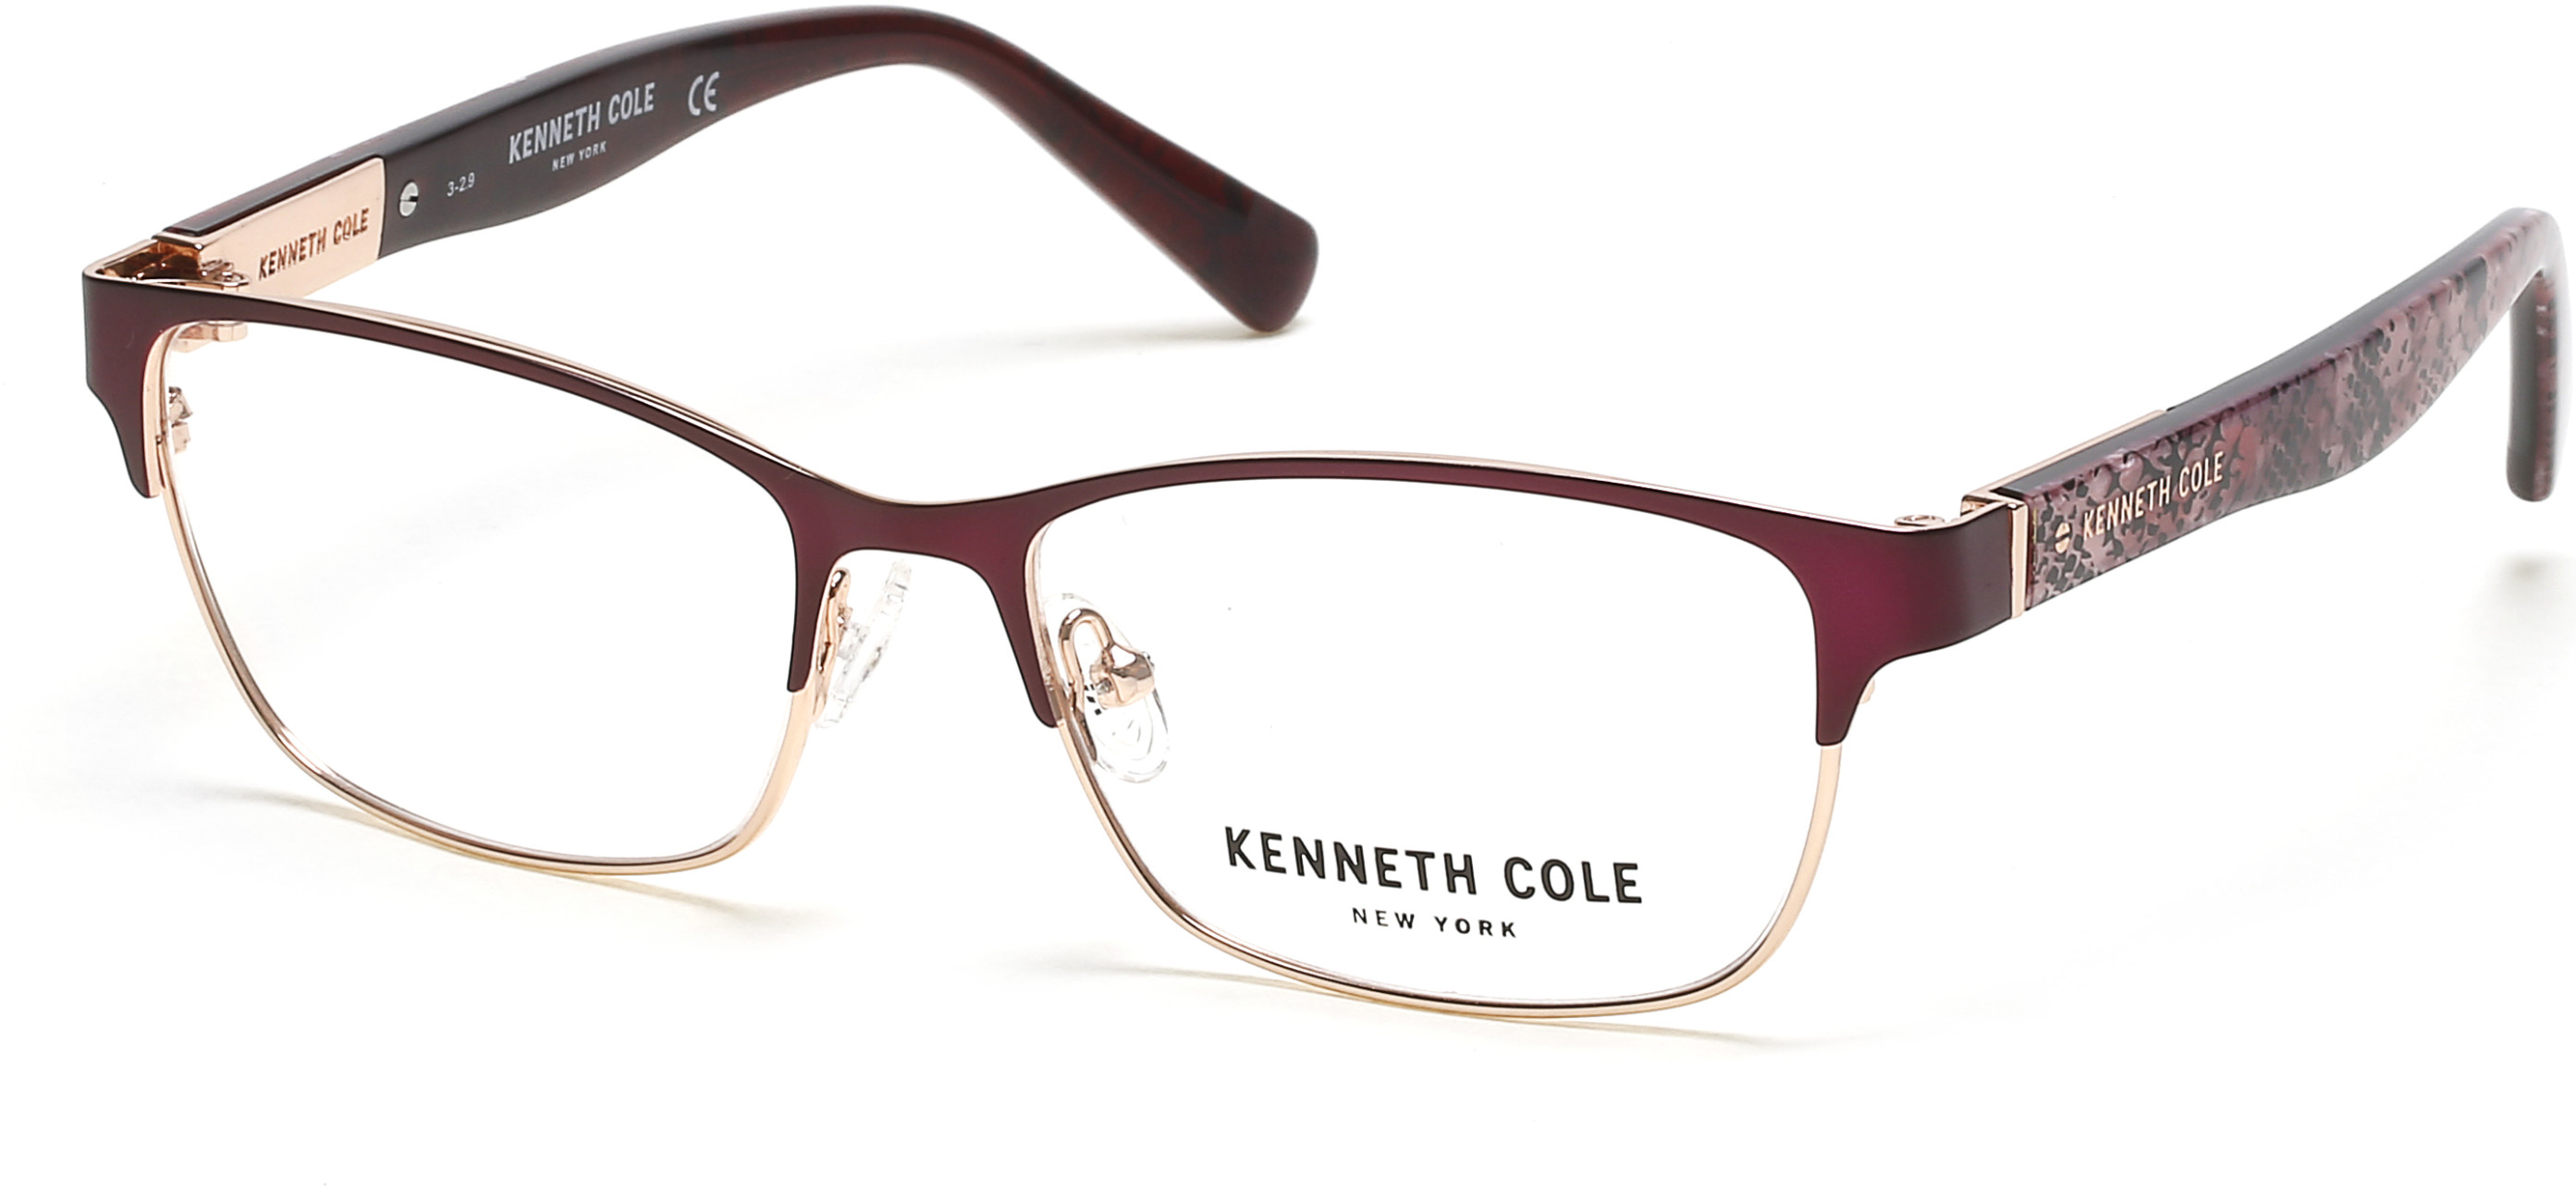 KENNETH COLE NY 0317 070